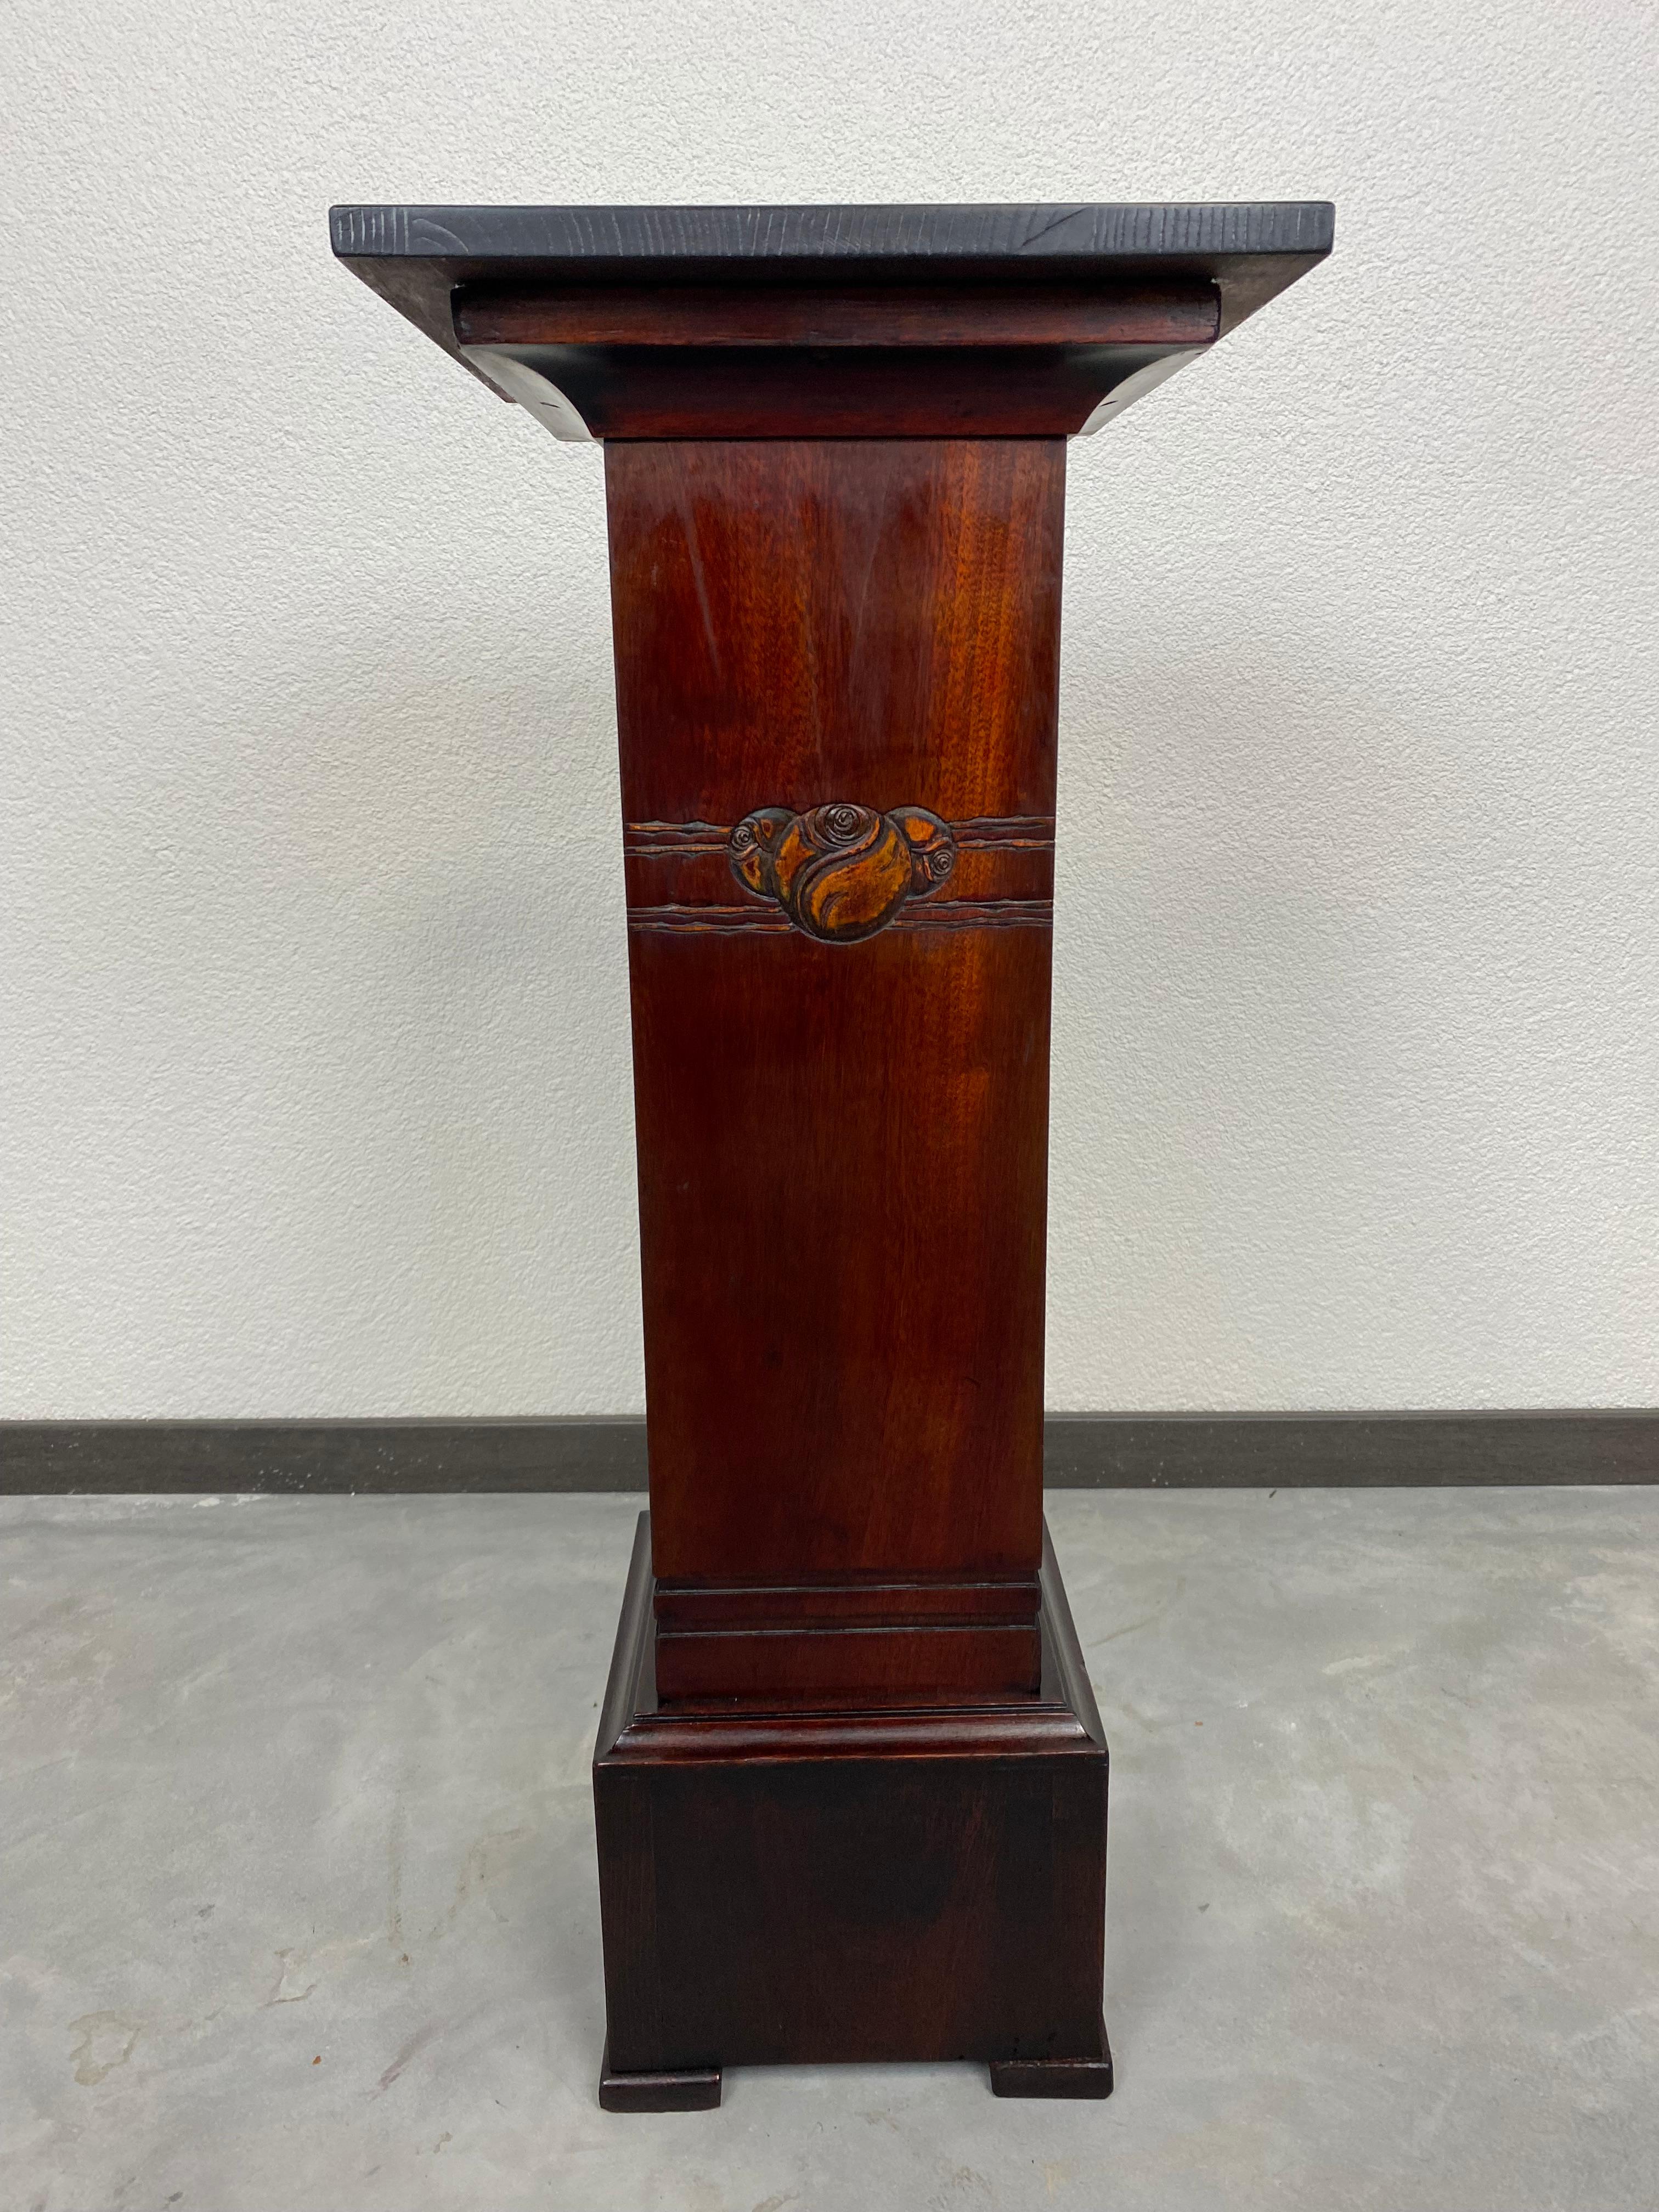 Secession plant column by Josef Maria Olbrich with carved flowers typical for Olbrich. Professionally stained and repolished.